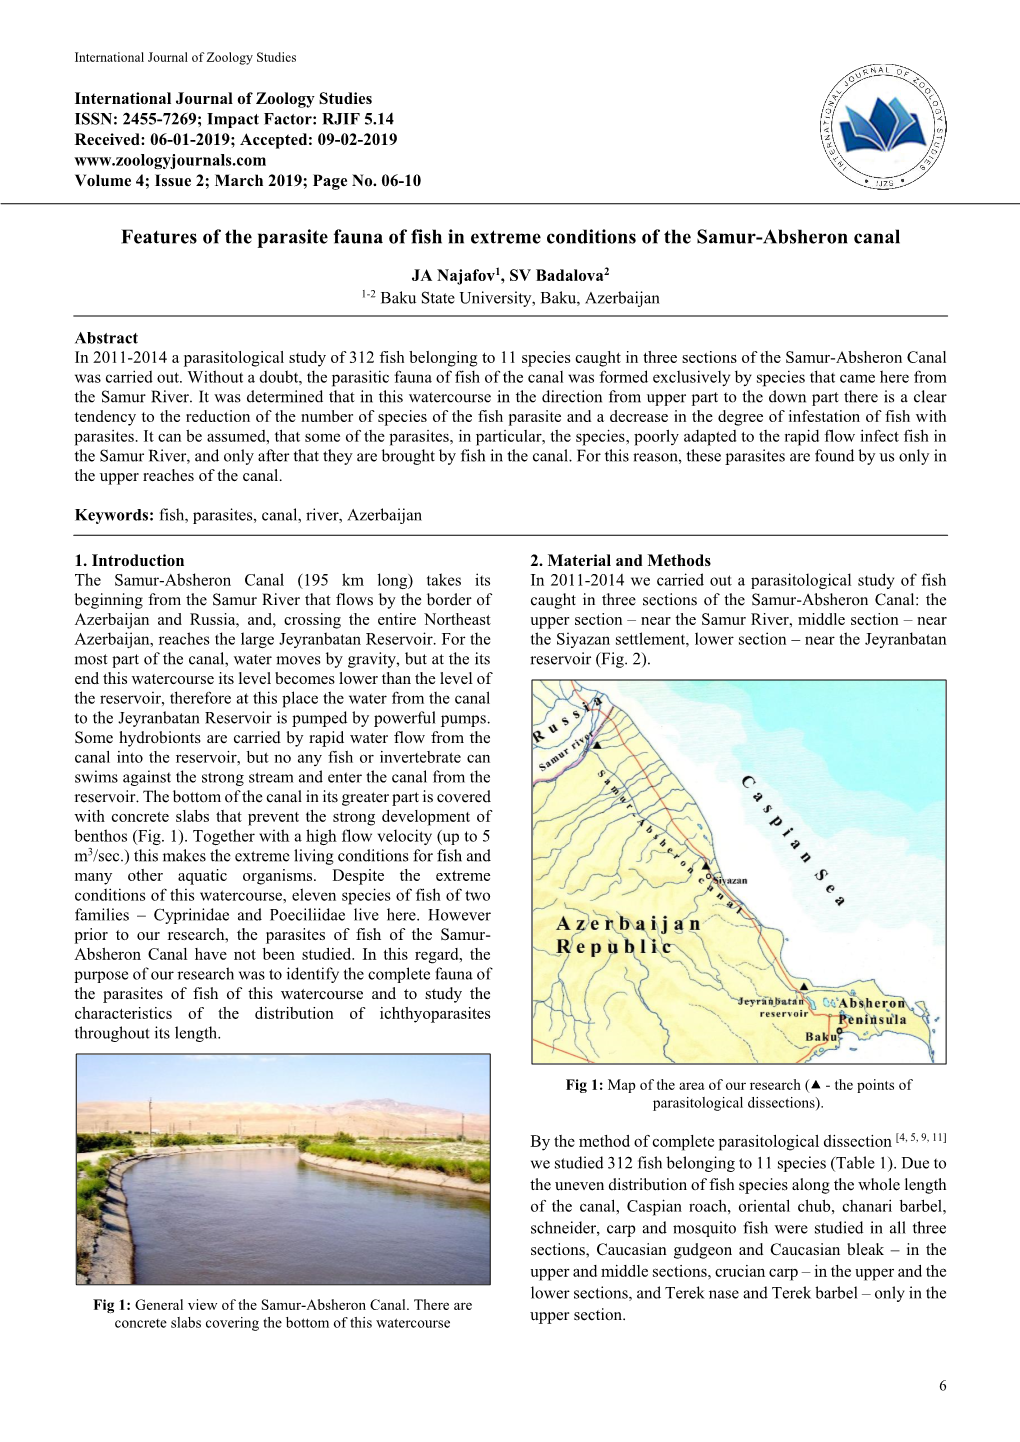 Features of the Parasite Fauna of Fish in Extreme Conditions of the Samur-Absheron Canal